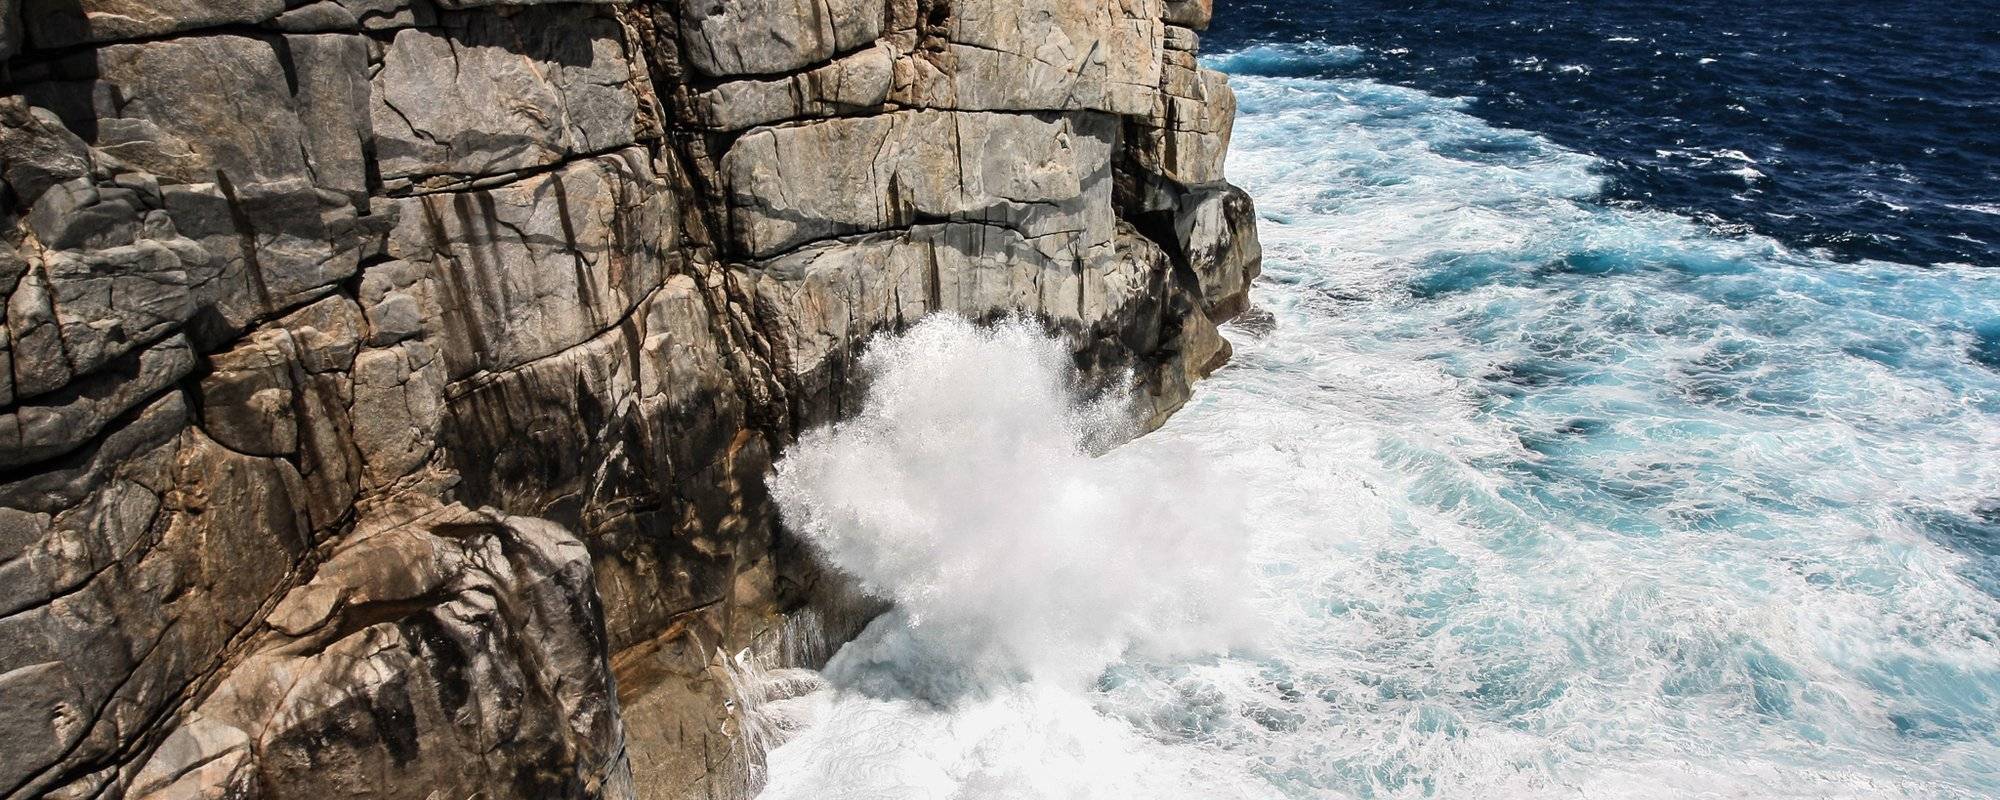 My Pictures From The Wild Coastline Of Albany, Western Australia